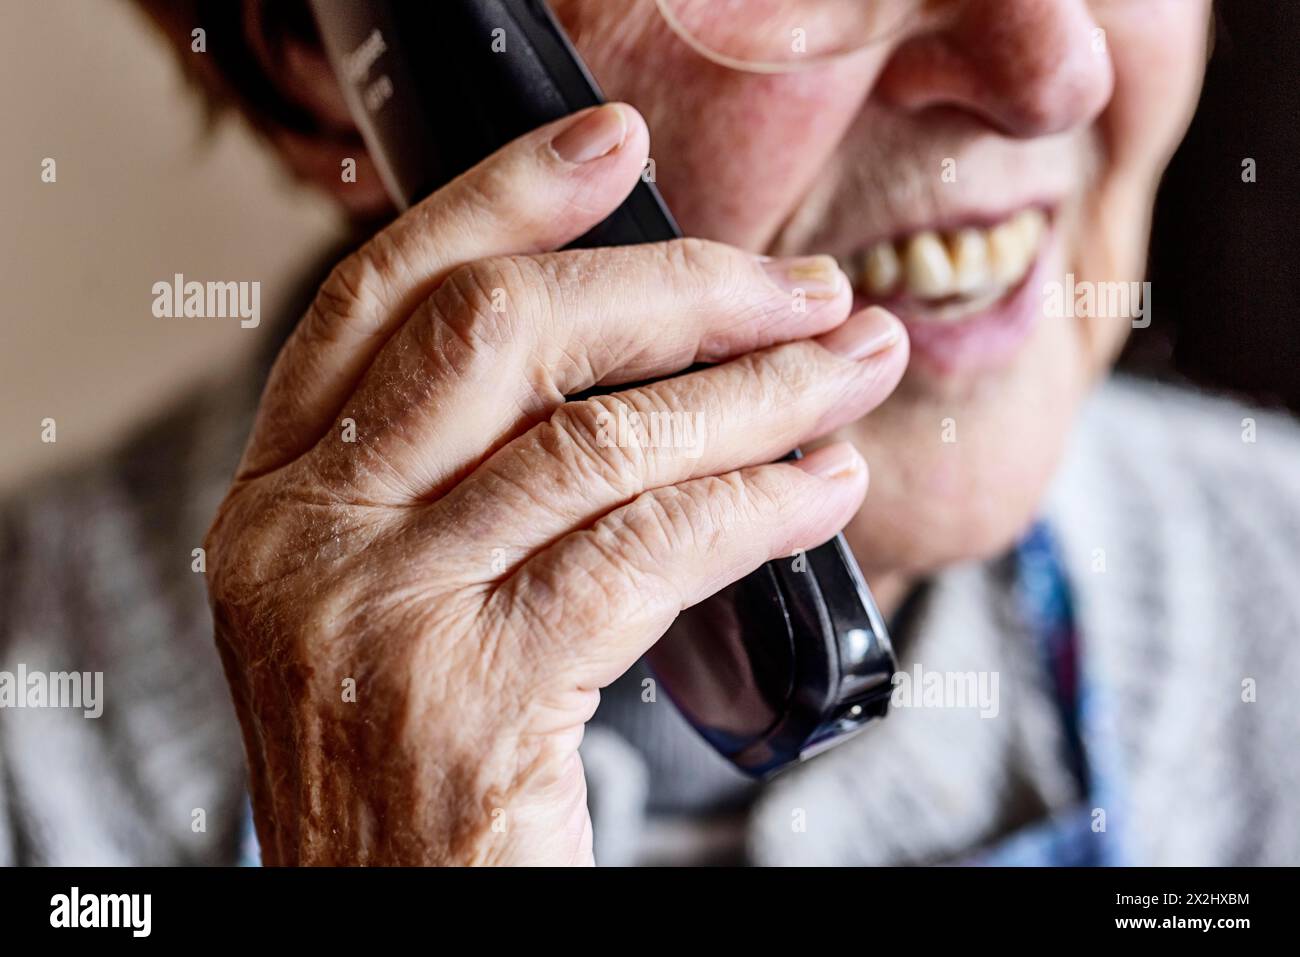 Mouth, hands and telephone receiver of a senior citizen making a phone call, close-up, Cologne, North Rhine-Westphalia, Germany Stock Photo